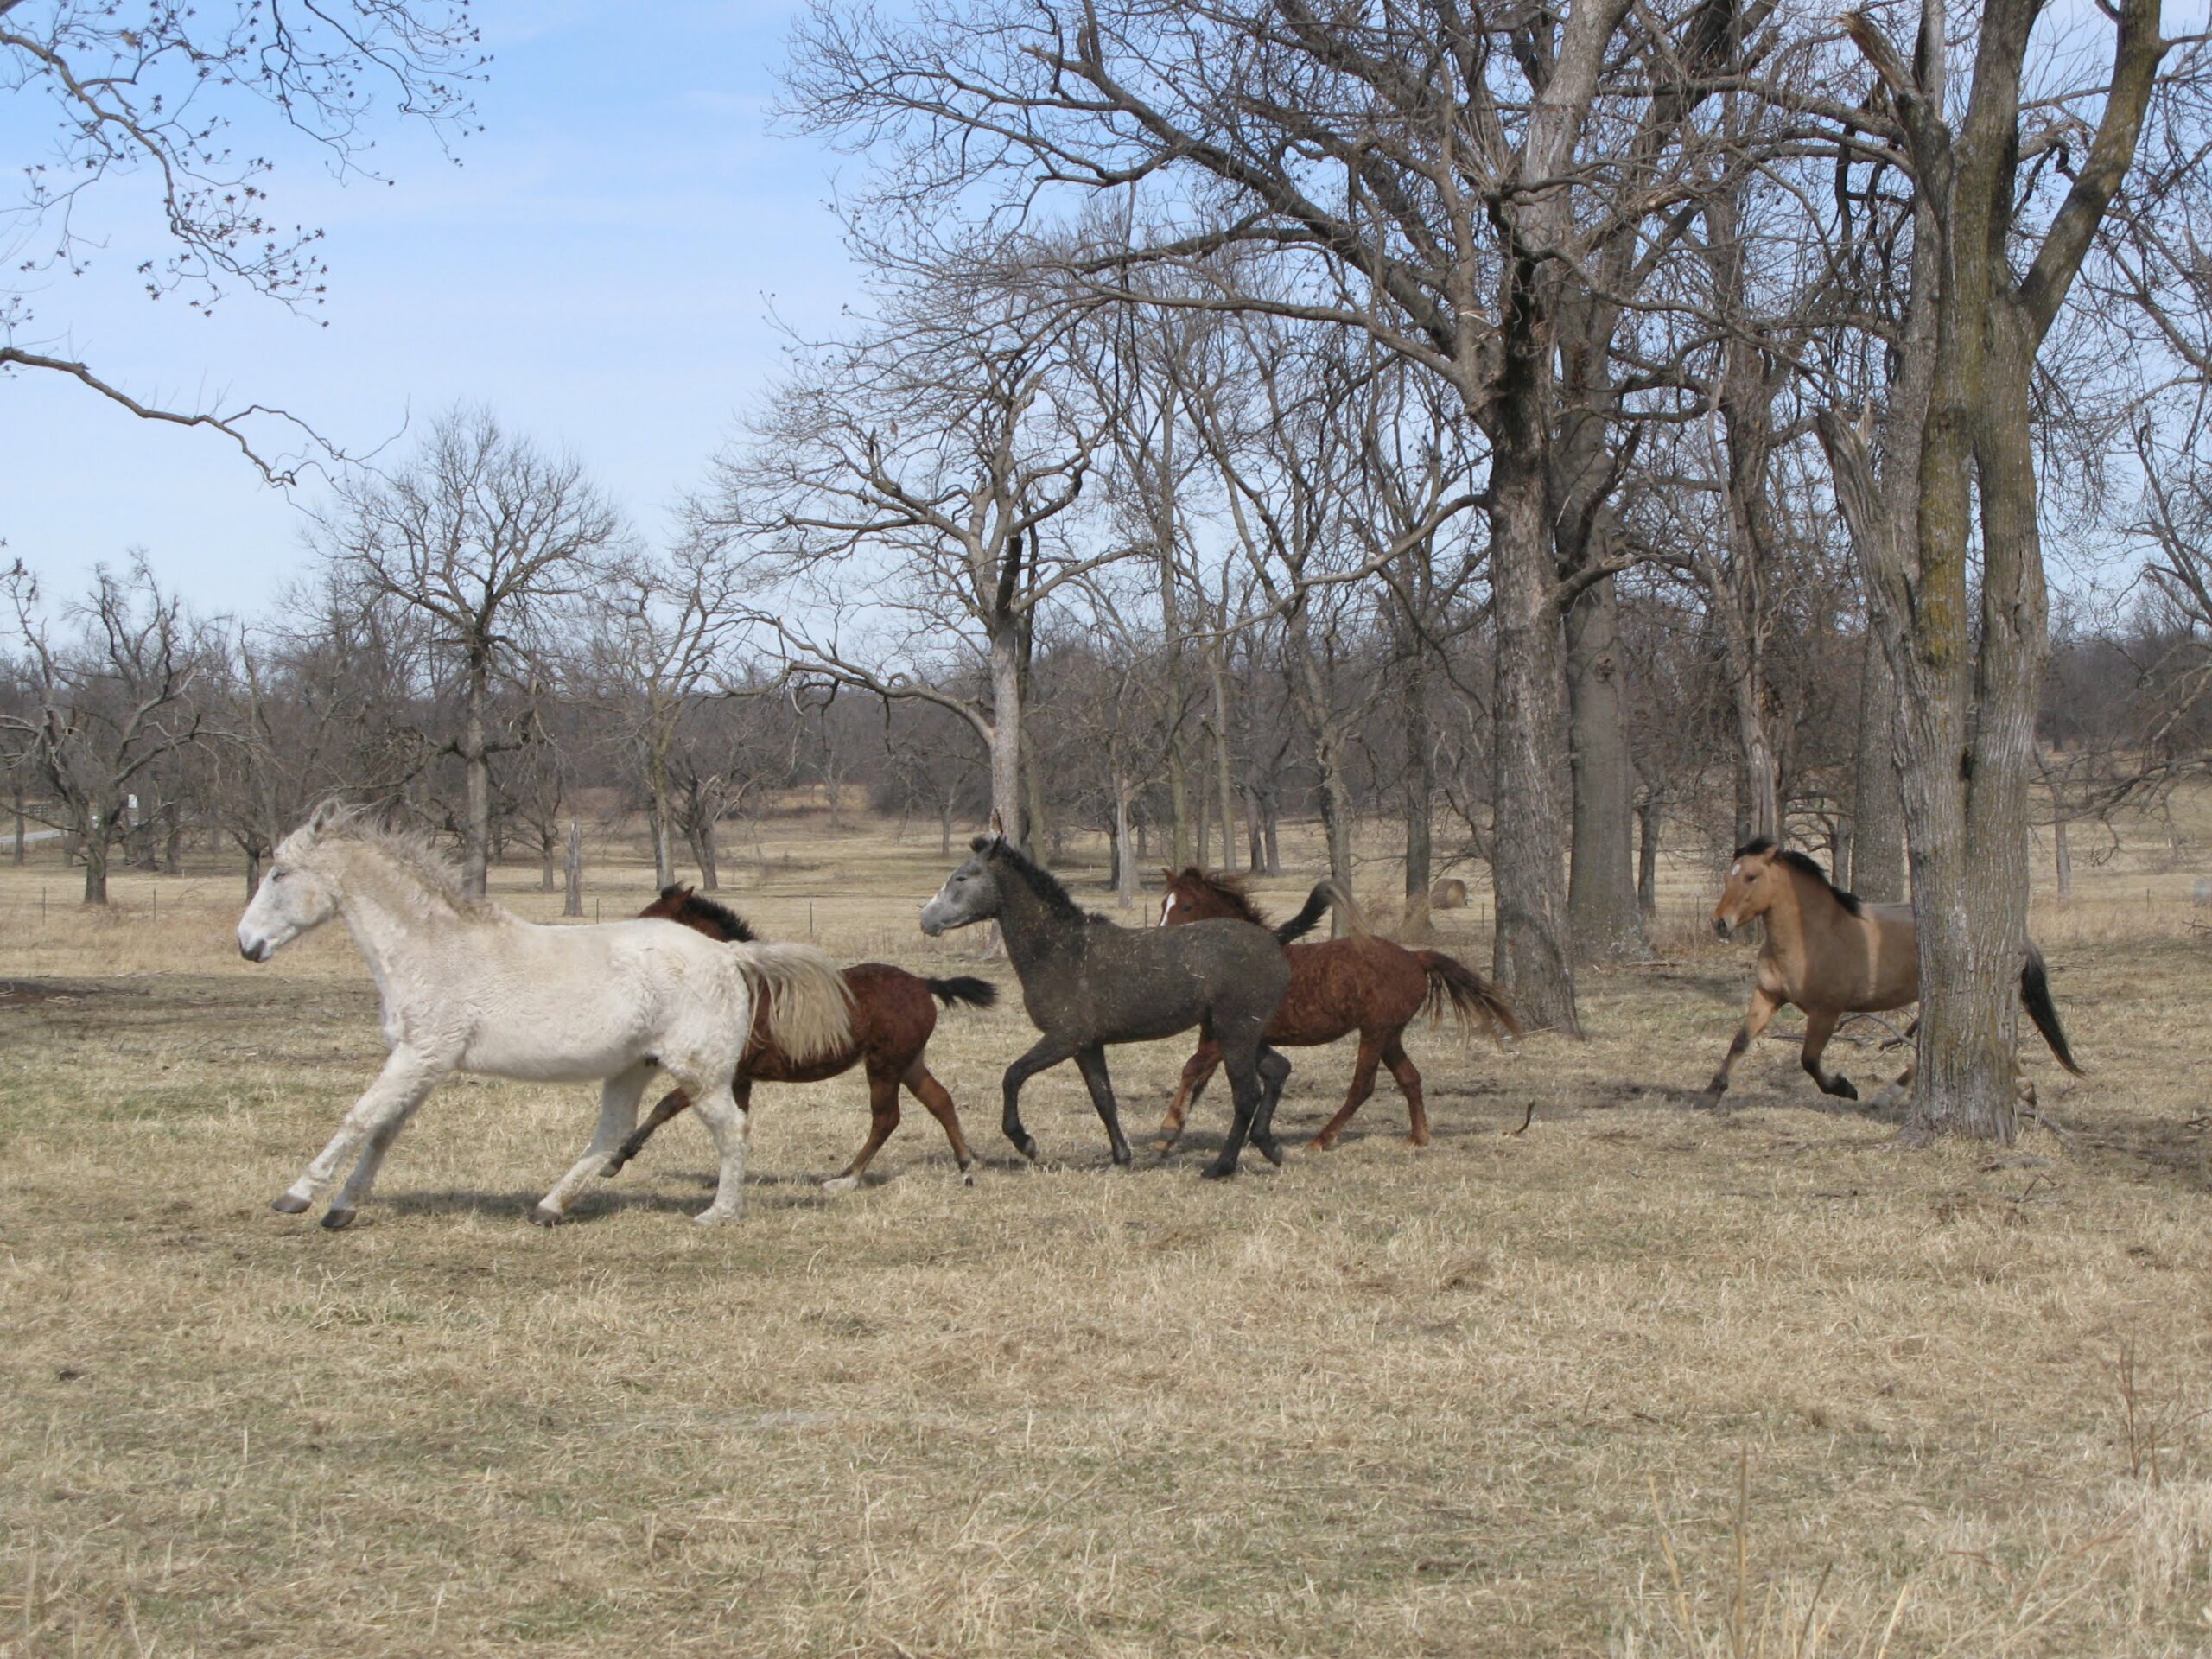 A herd of horses including two foals.